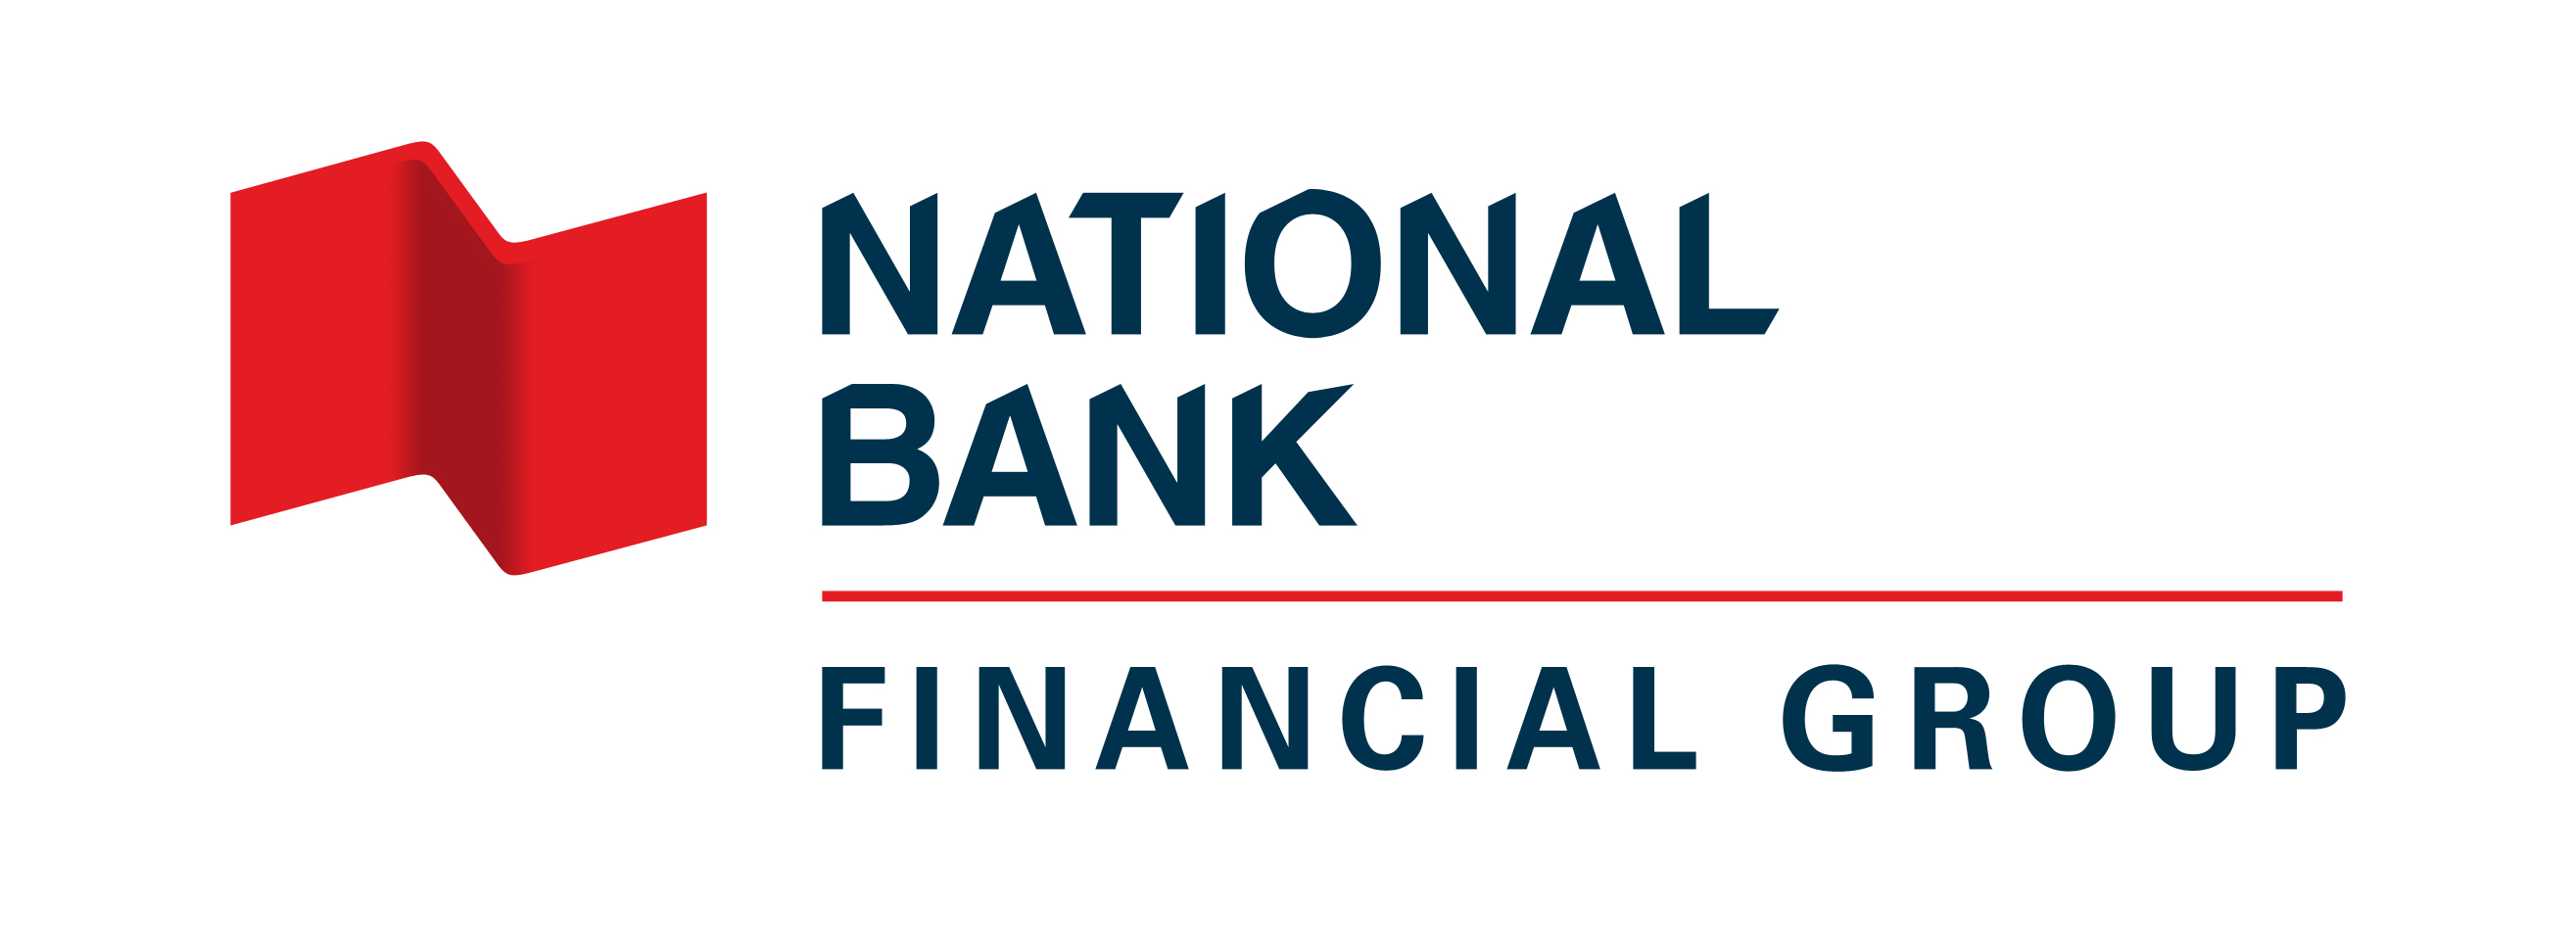 National Bank Returns to the Broker Channel